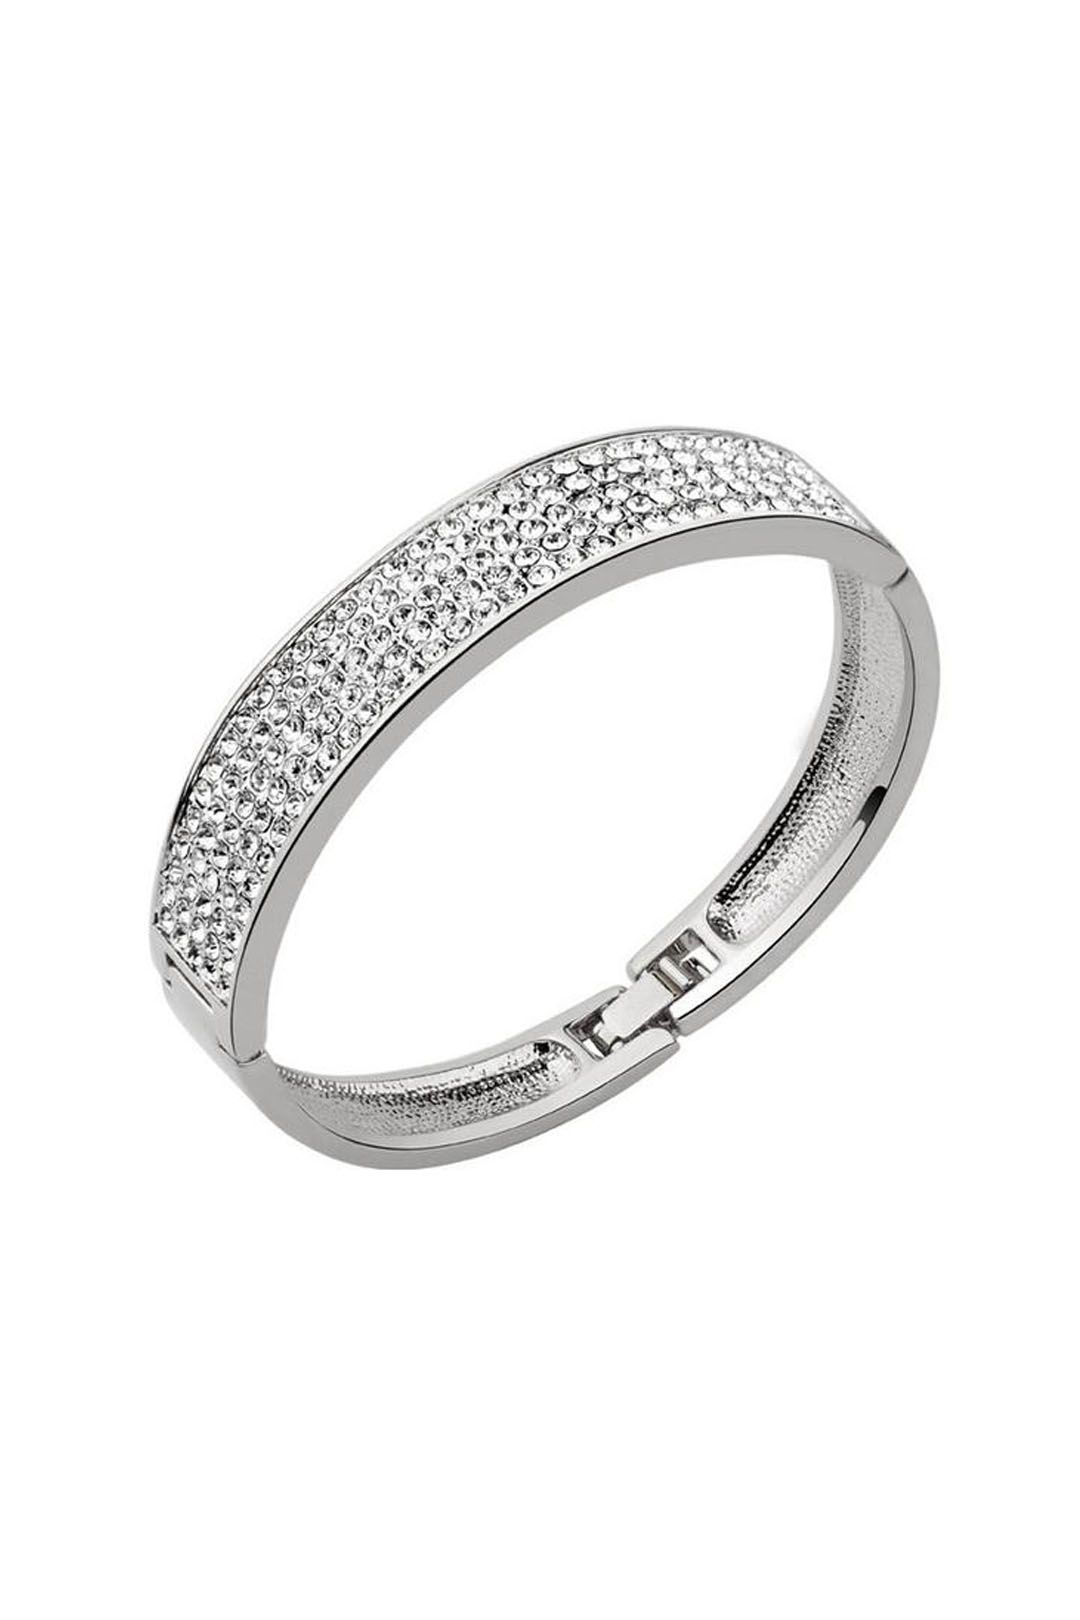 Krystal Couture - Classic Bangle - Silver - Side